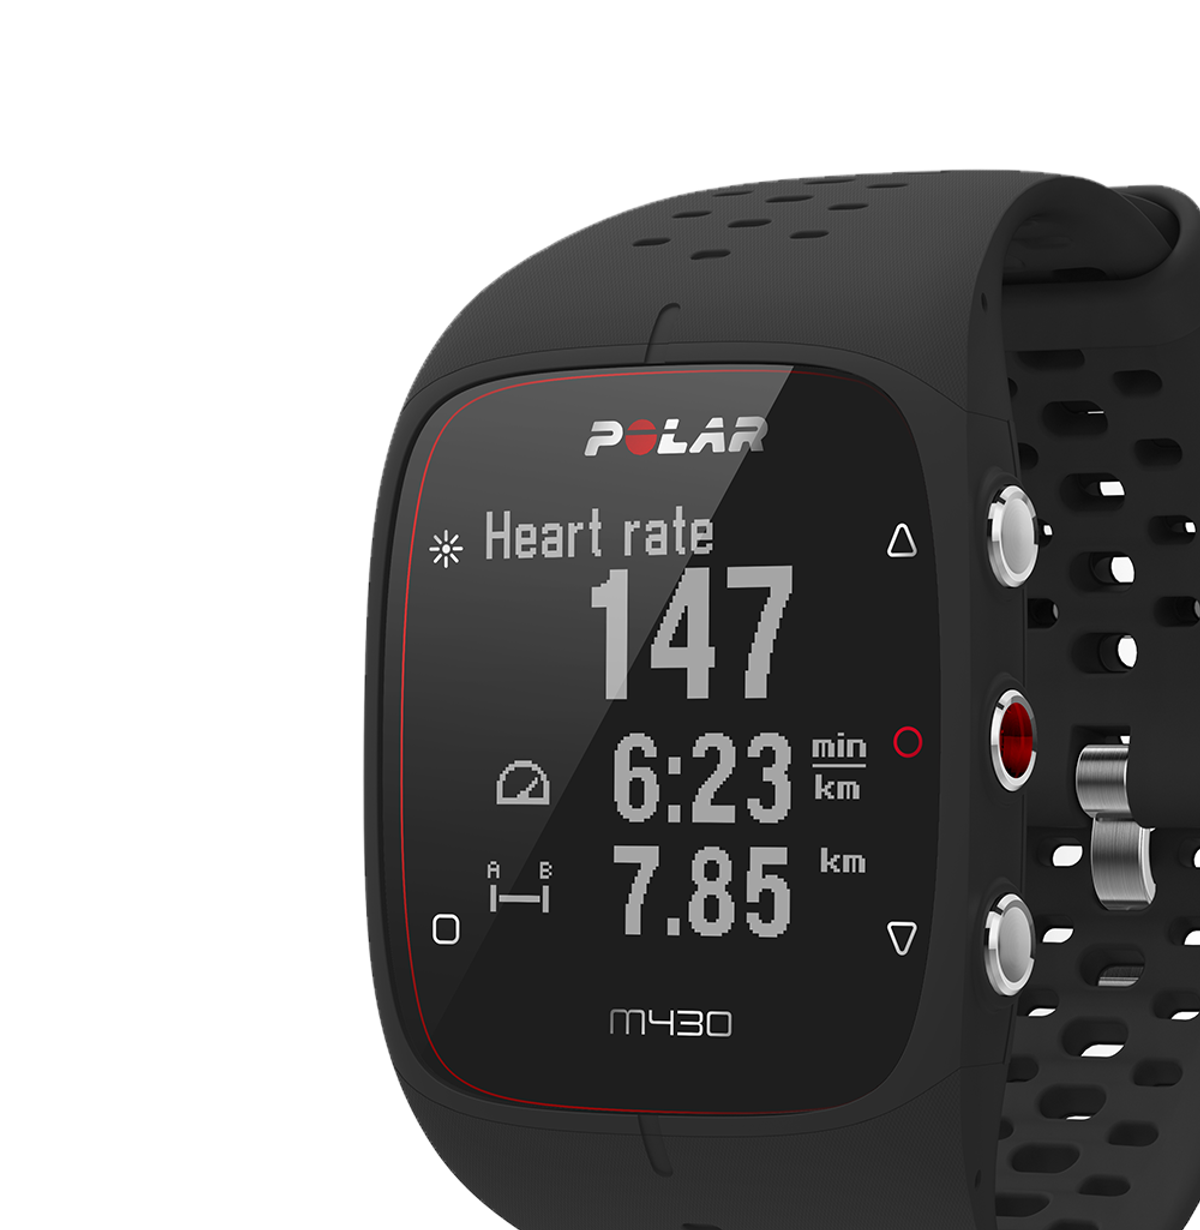 M430 | Running watch with GPS tracker and pace | Polar USA